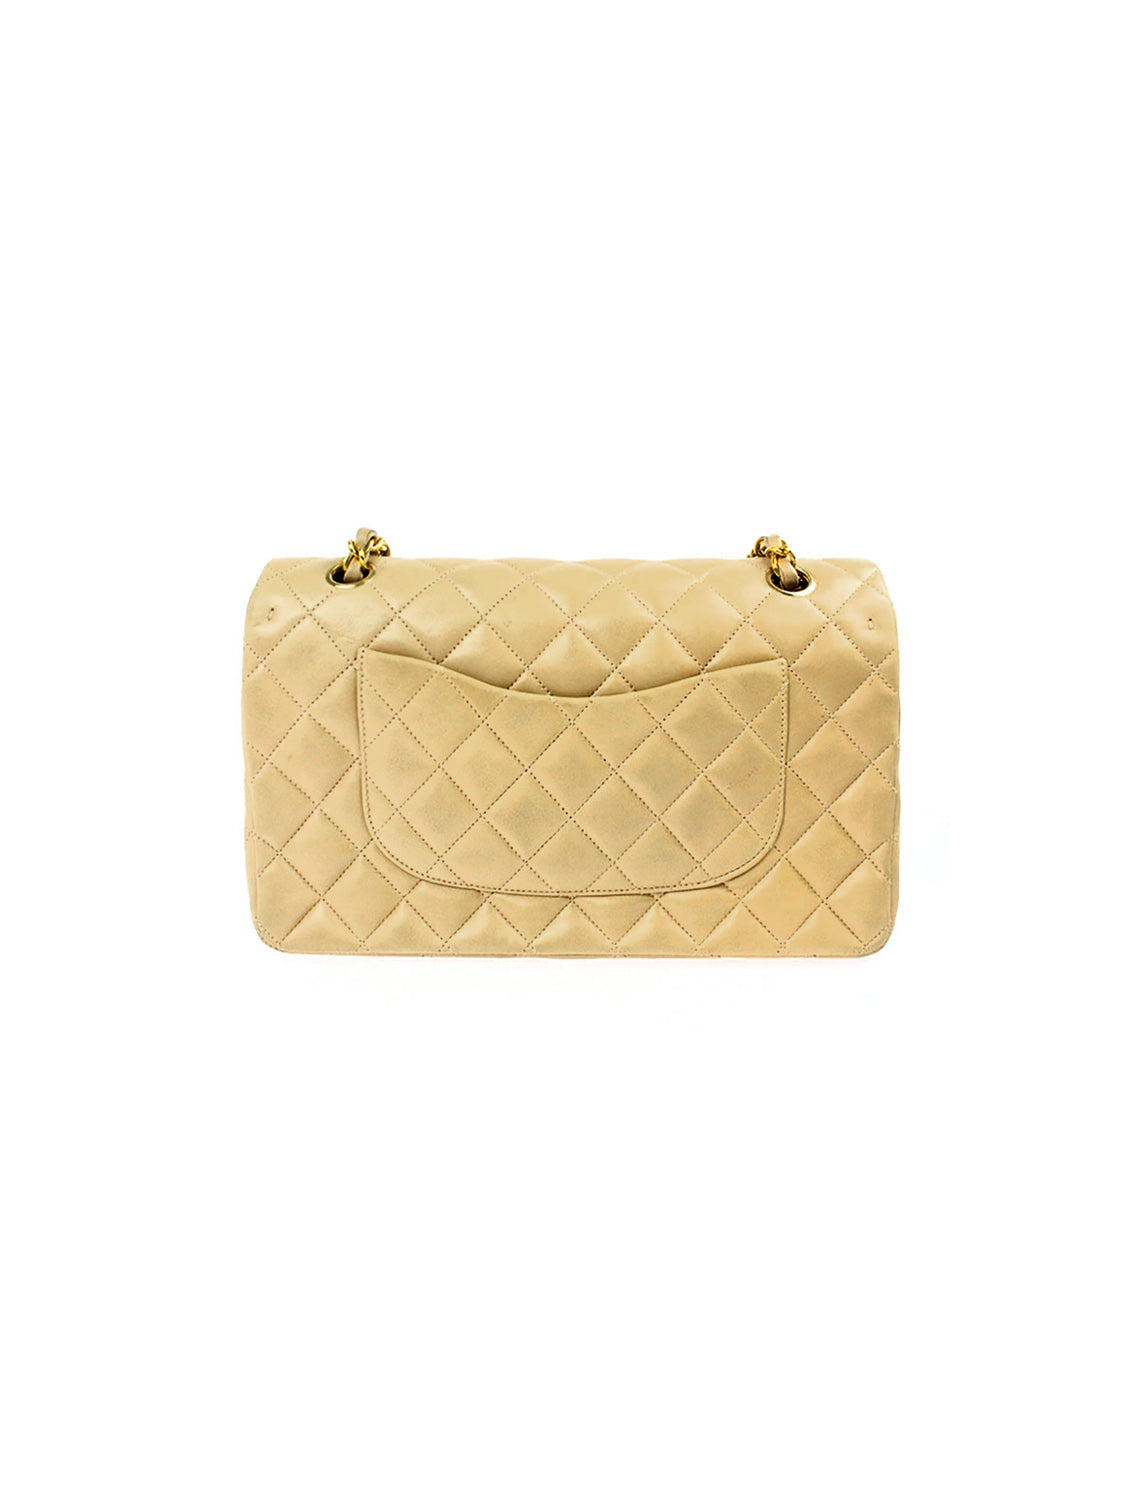 Chanel Vintage Clear Quilted Vinyl And Black Patent Leather Maxi Flap Bag  Gold Hardware, 1994-1996 Available For Immediate Sale At Sotheby's